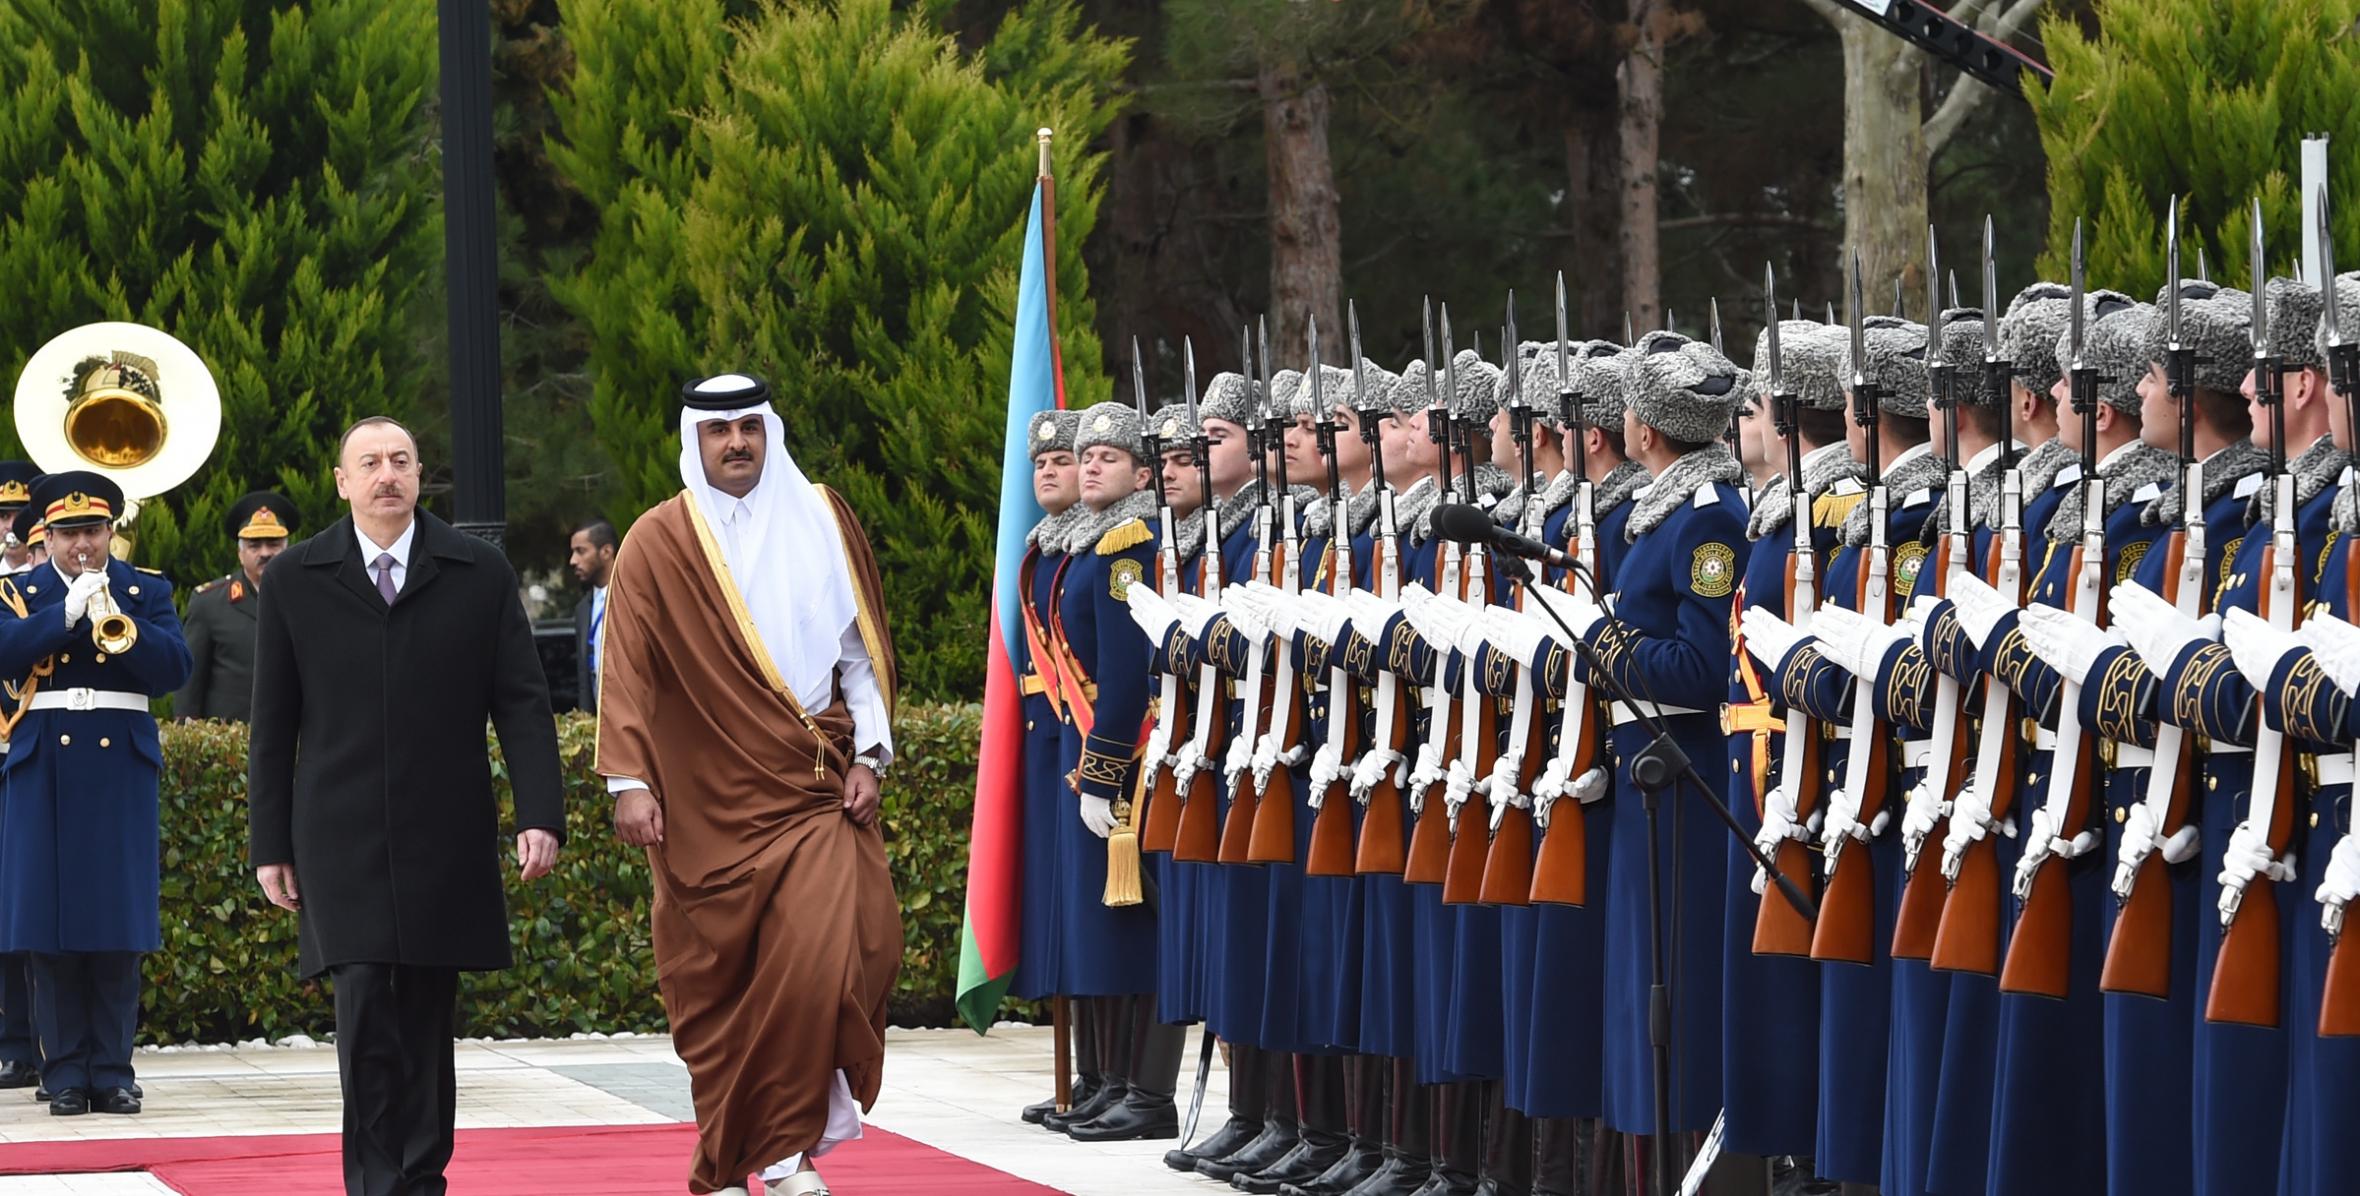 Official welcoming ceremony was held for the Emir of the State of Qatar